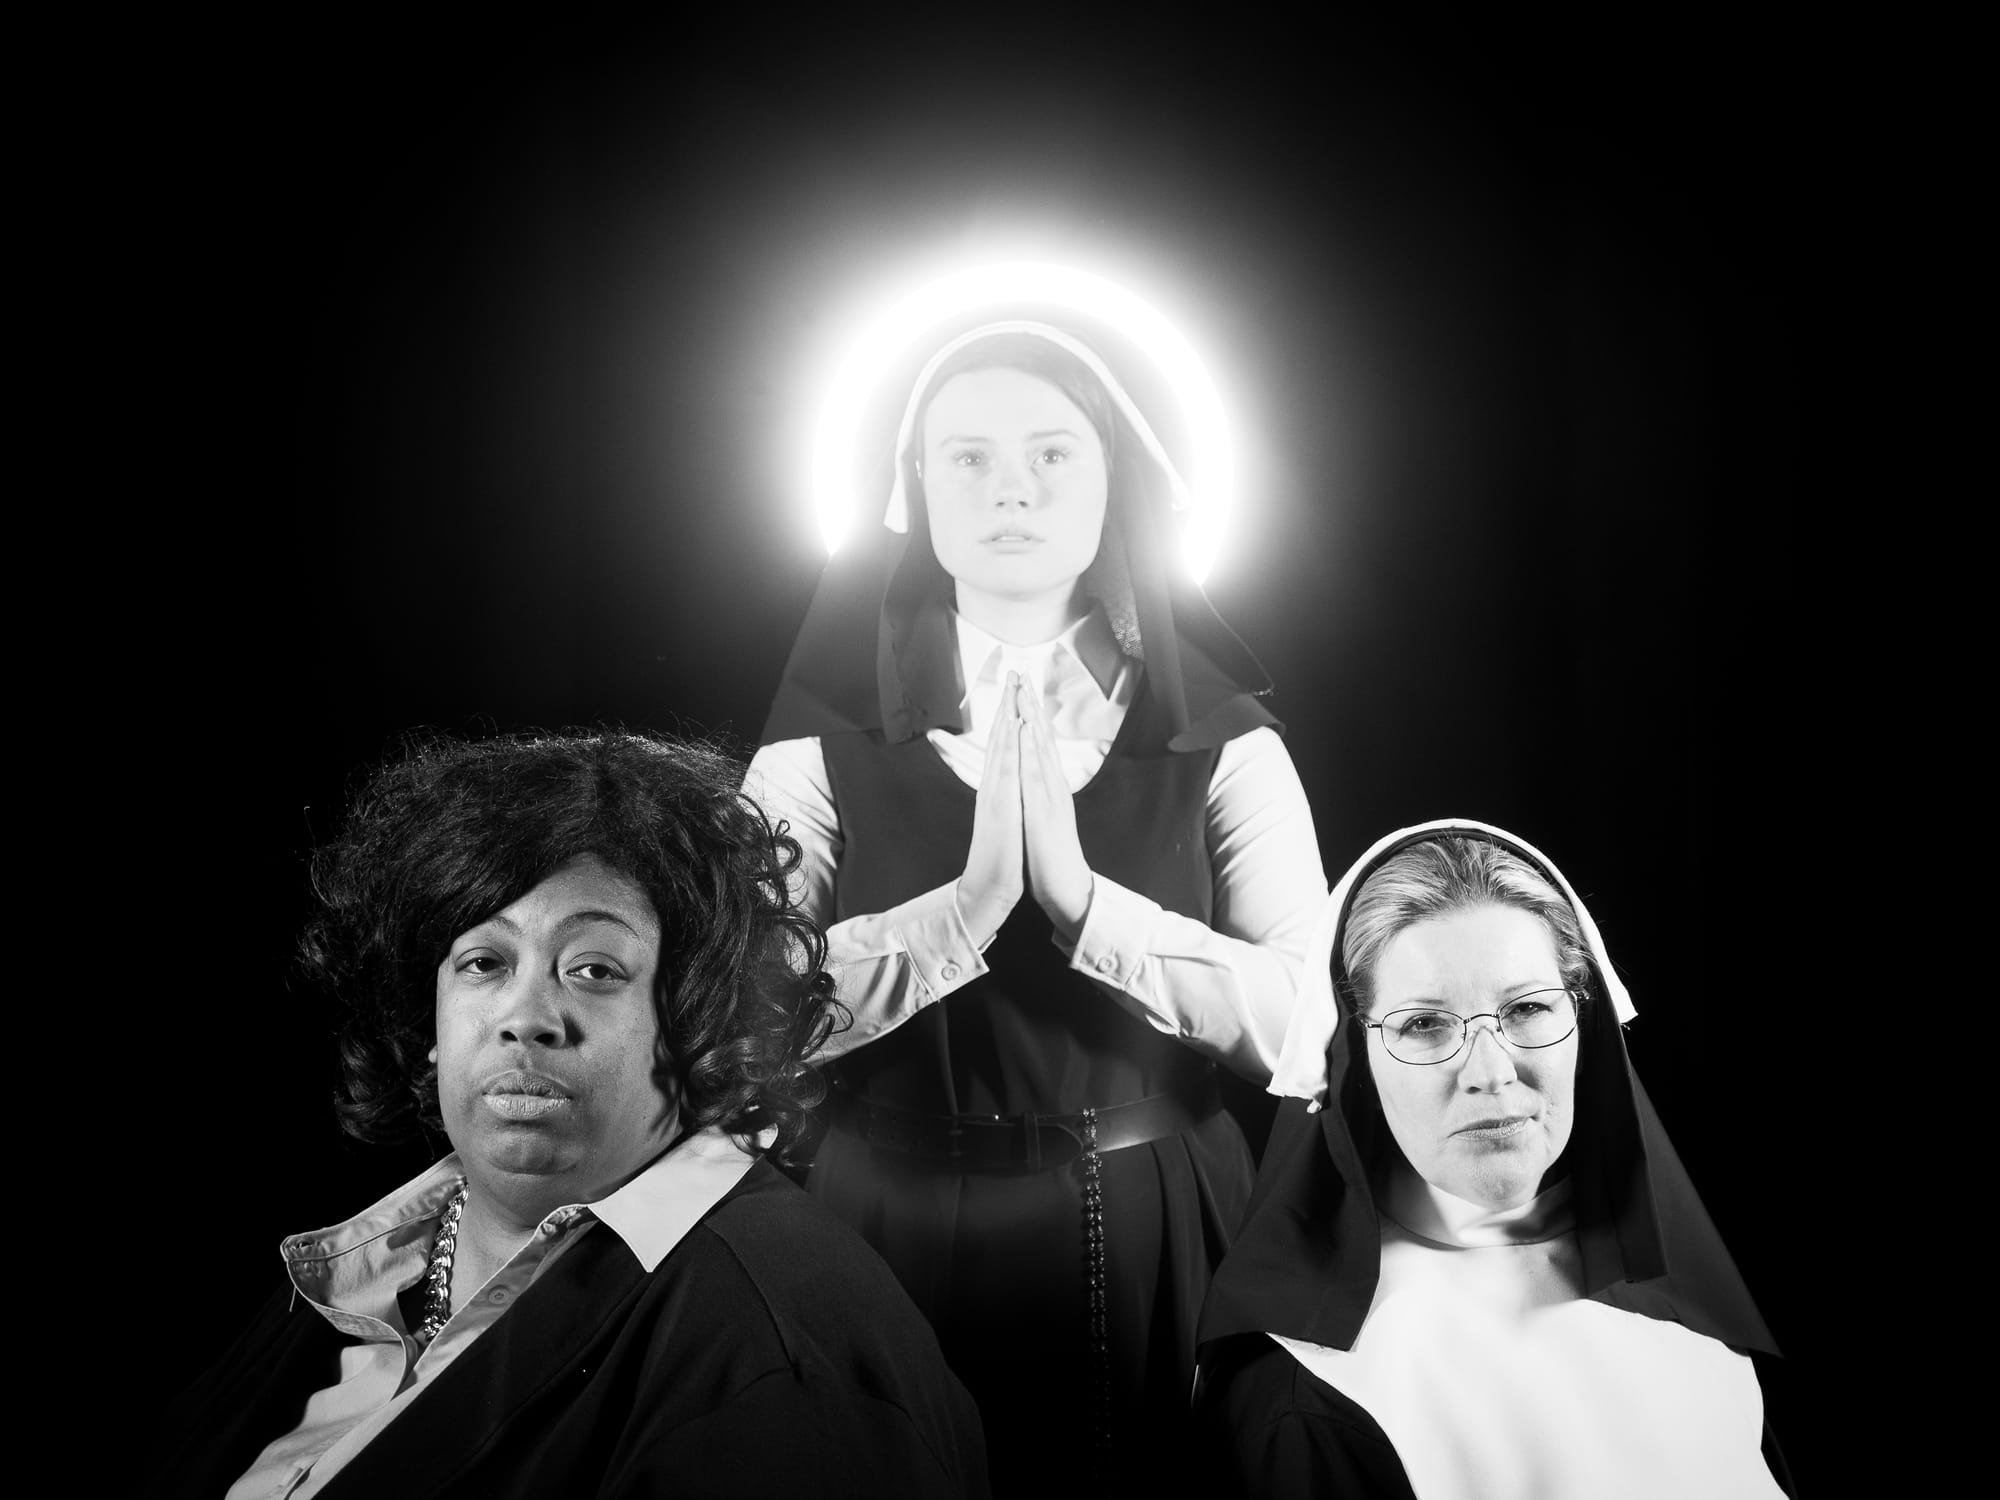 Bradley Playhouse to present compelling tale of faith and maternal instinct with "Agnes of God"